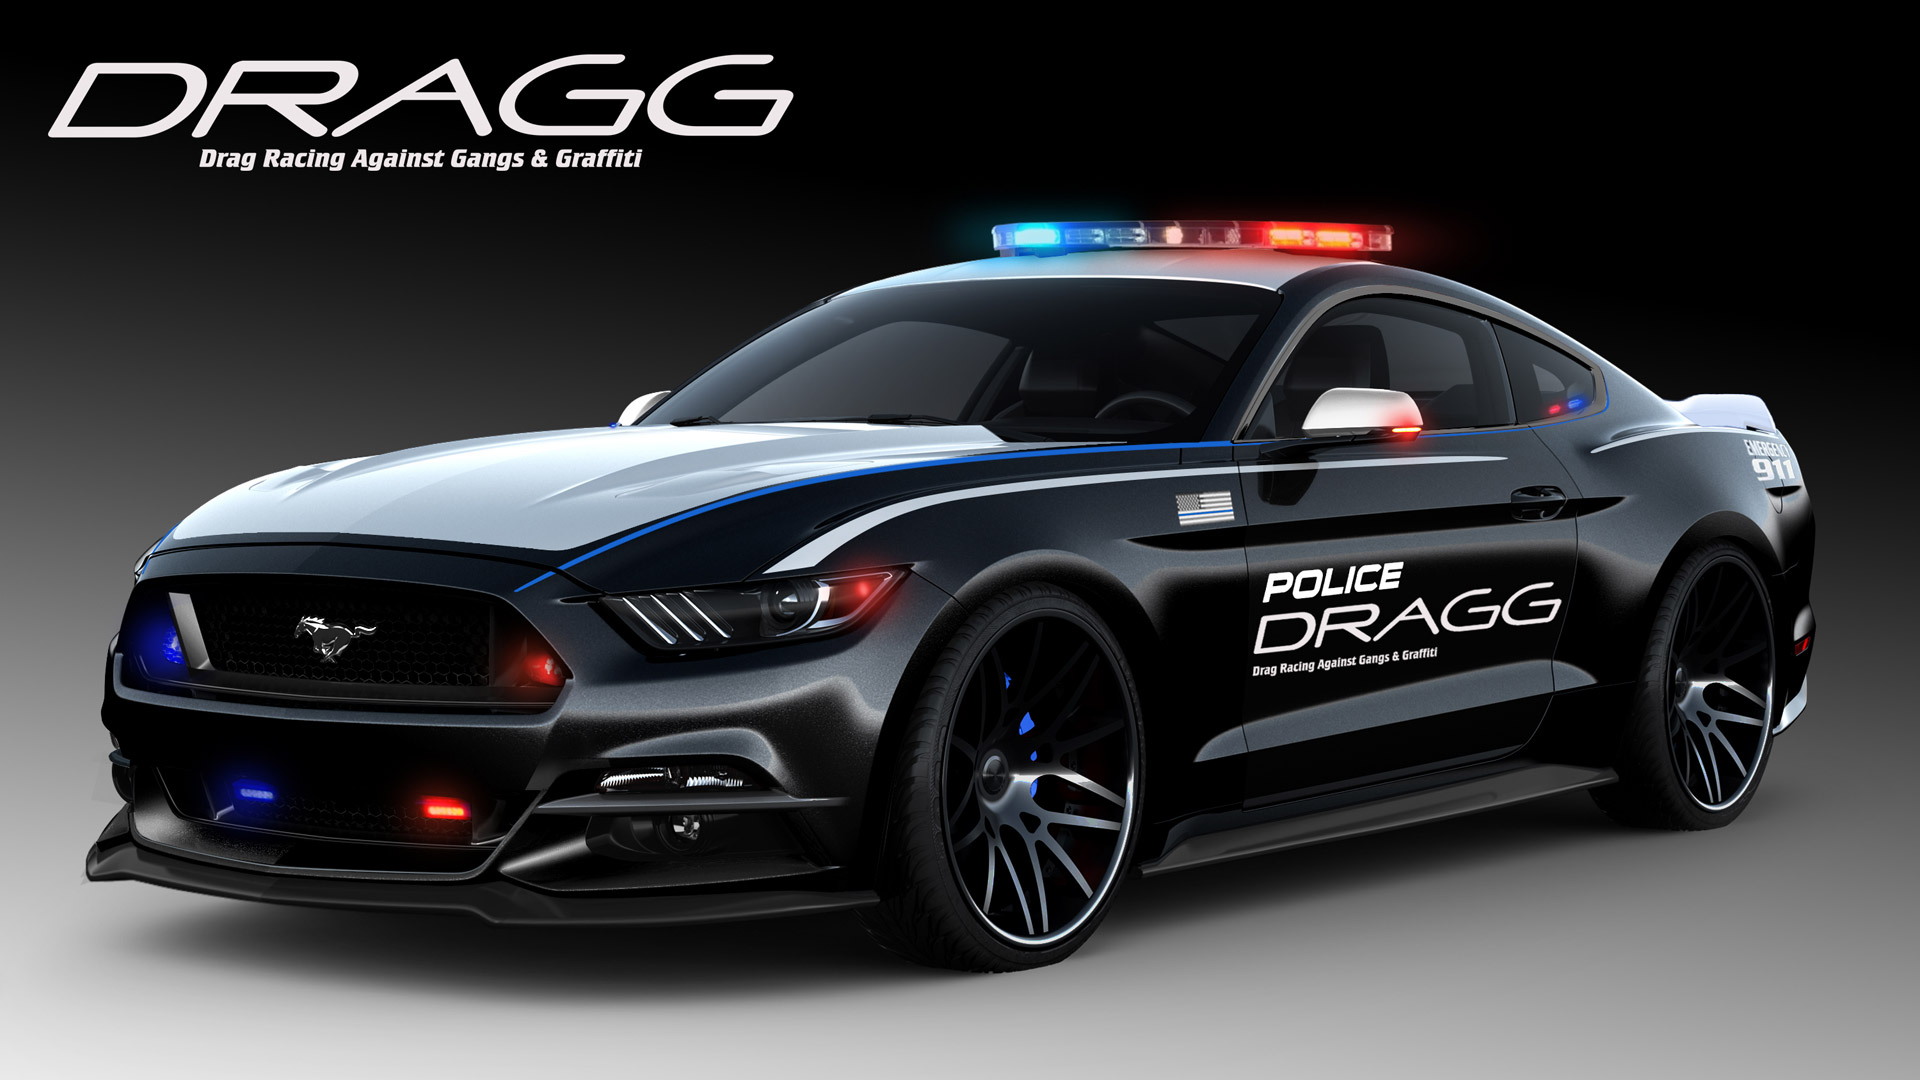 2016 Ford Mustang by DRAGG, 2015 SEMA show